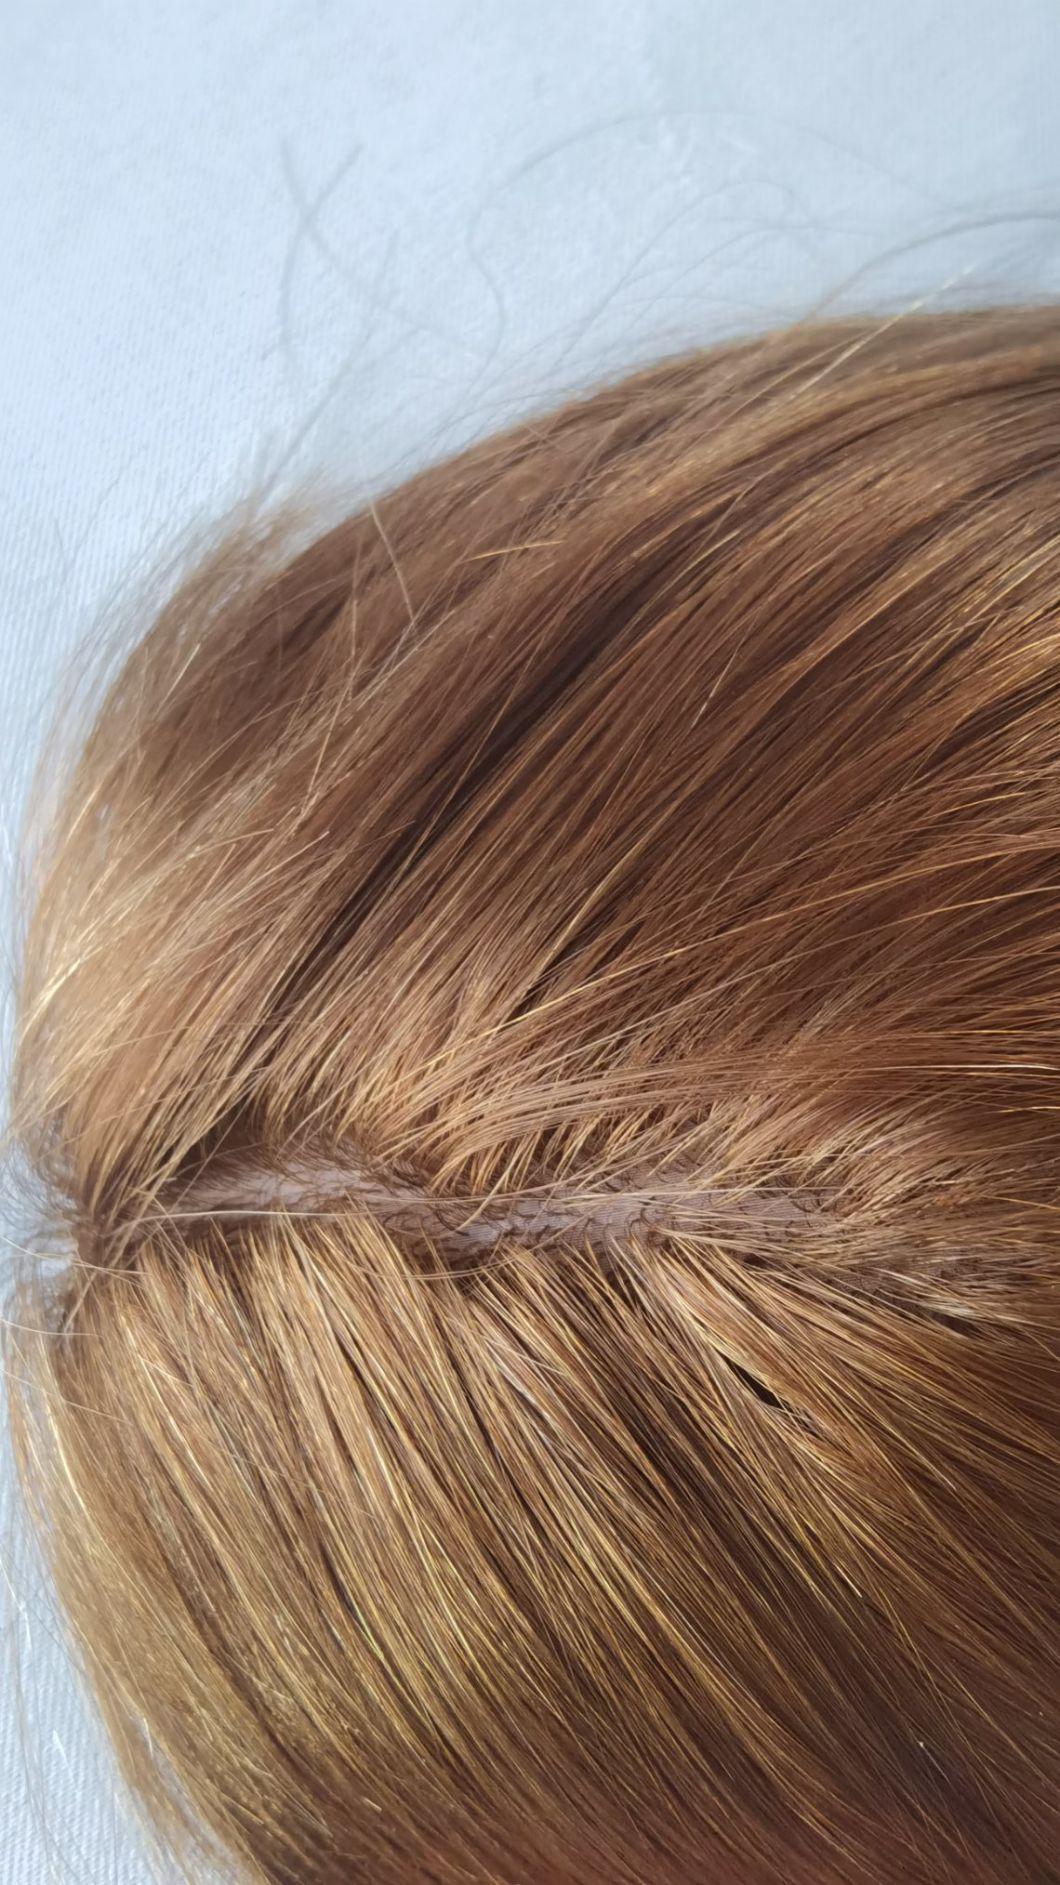 2022 Most Natural Silk Top Injected Lace Human Hair Hairpieces Made of Remy Human Hair